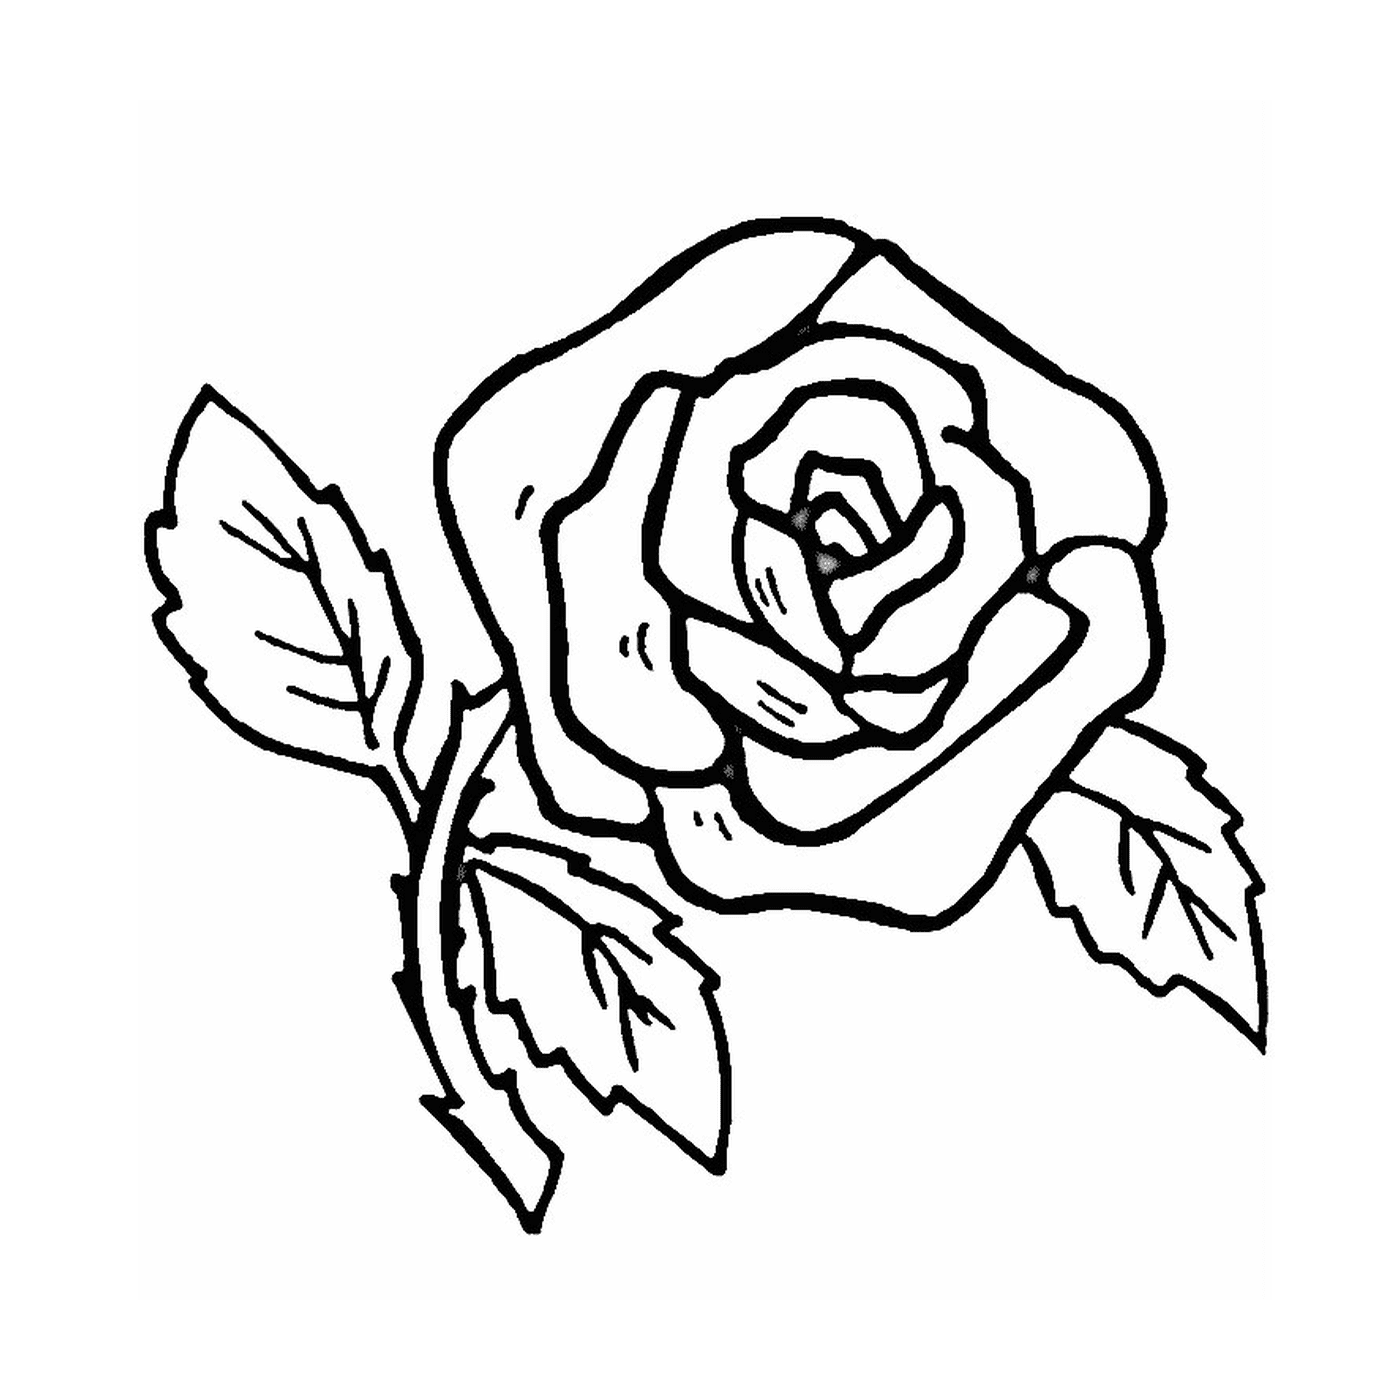  A simple and easy rose 